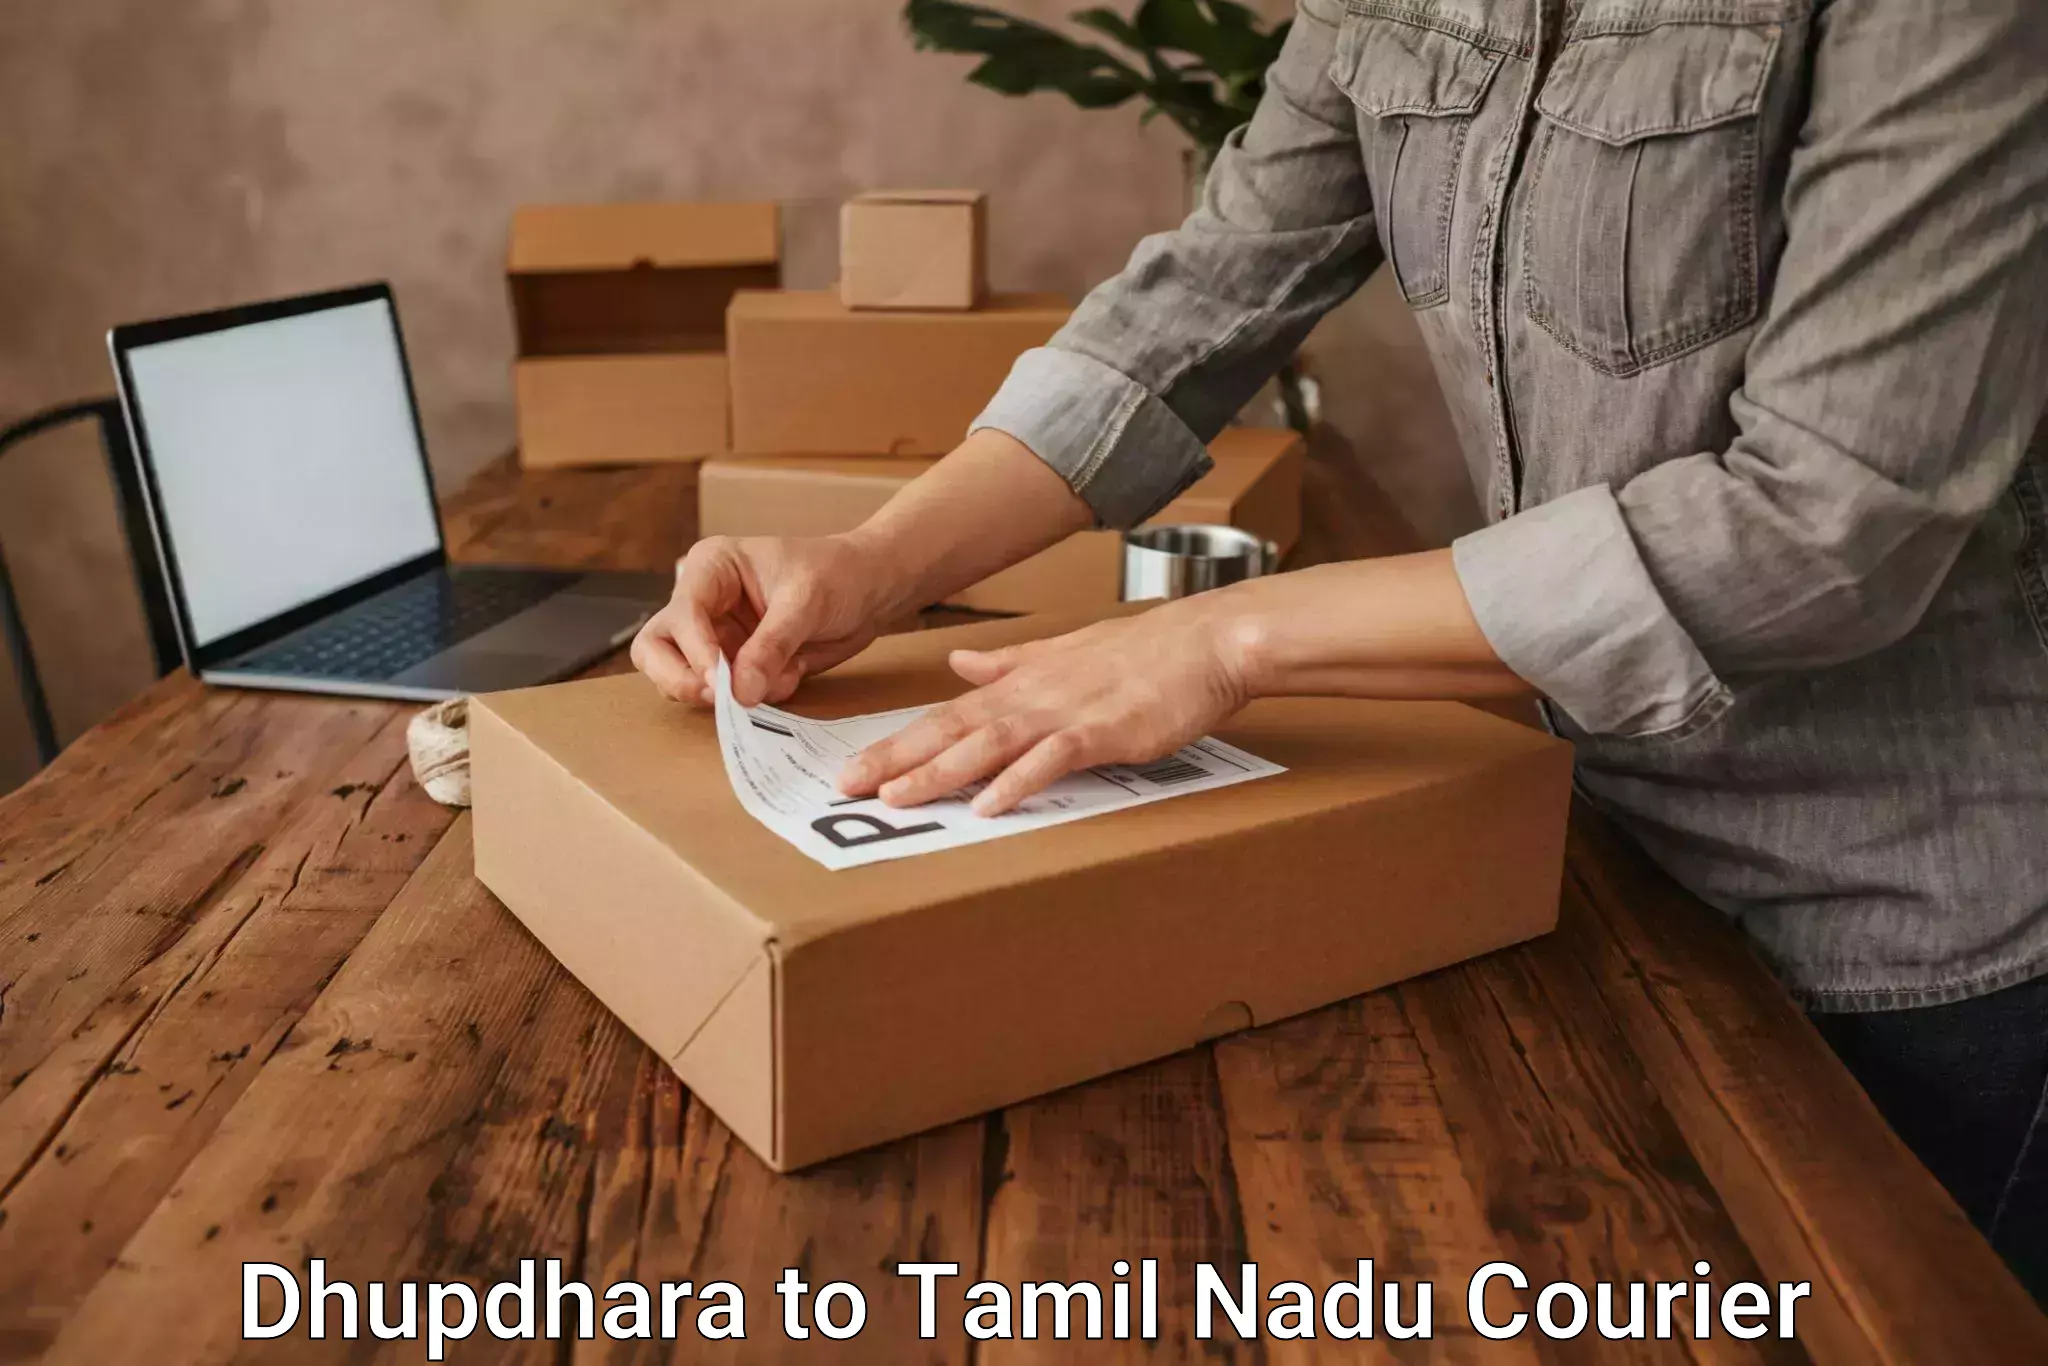 Courier services in Dhupdhara to Thiruporur